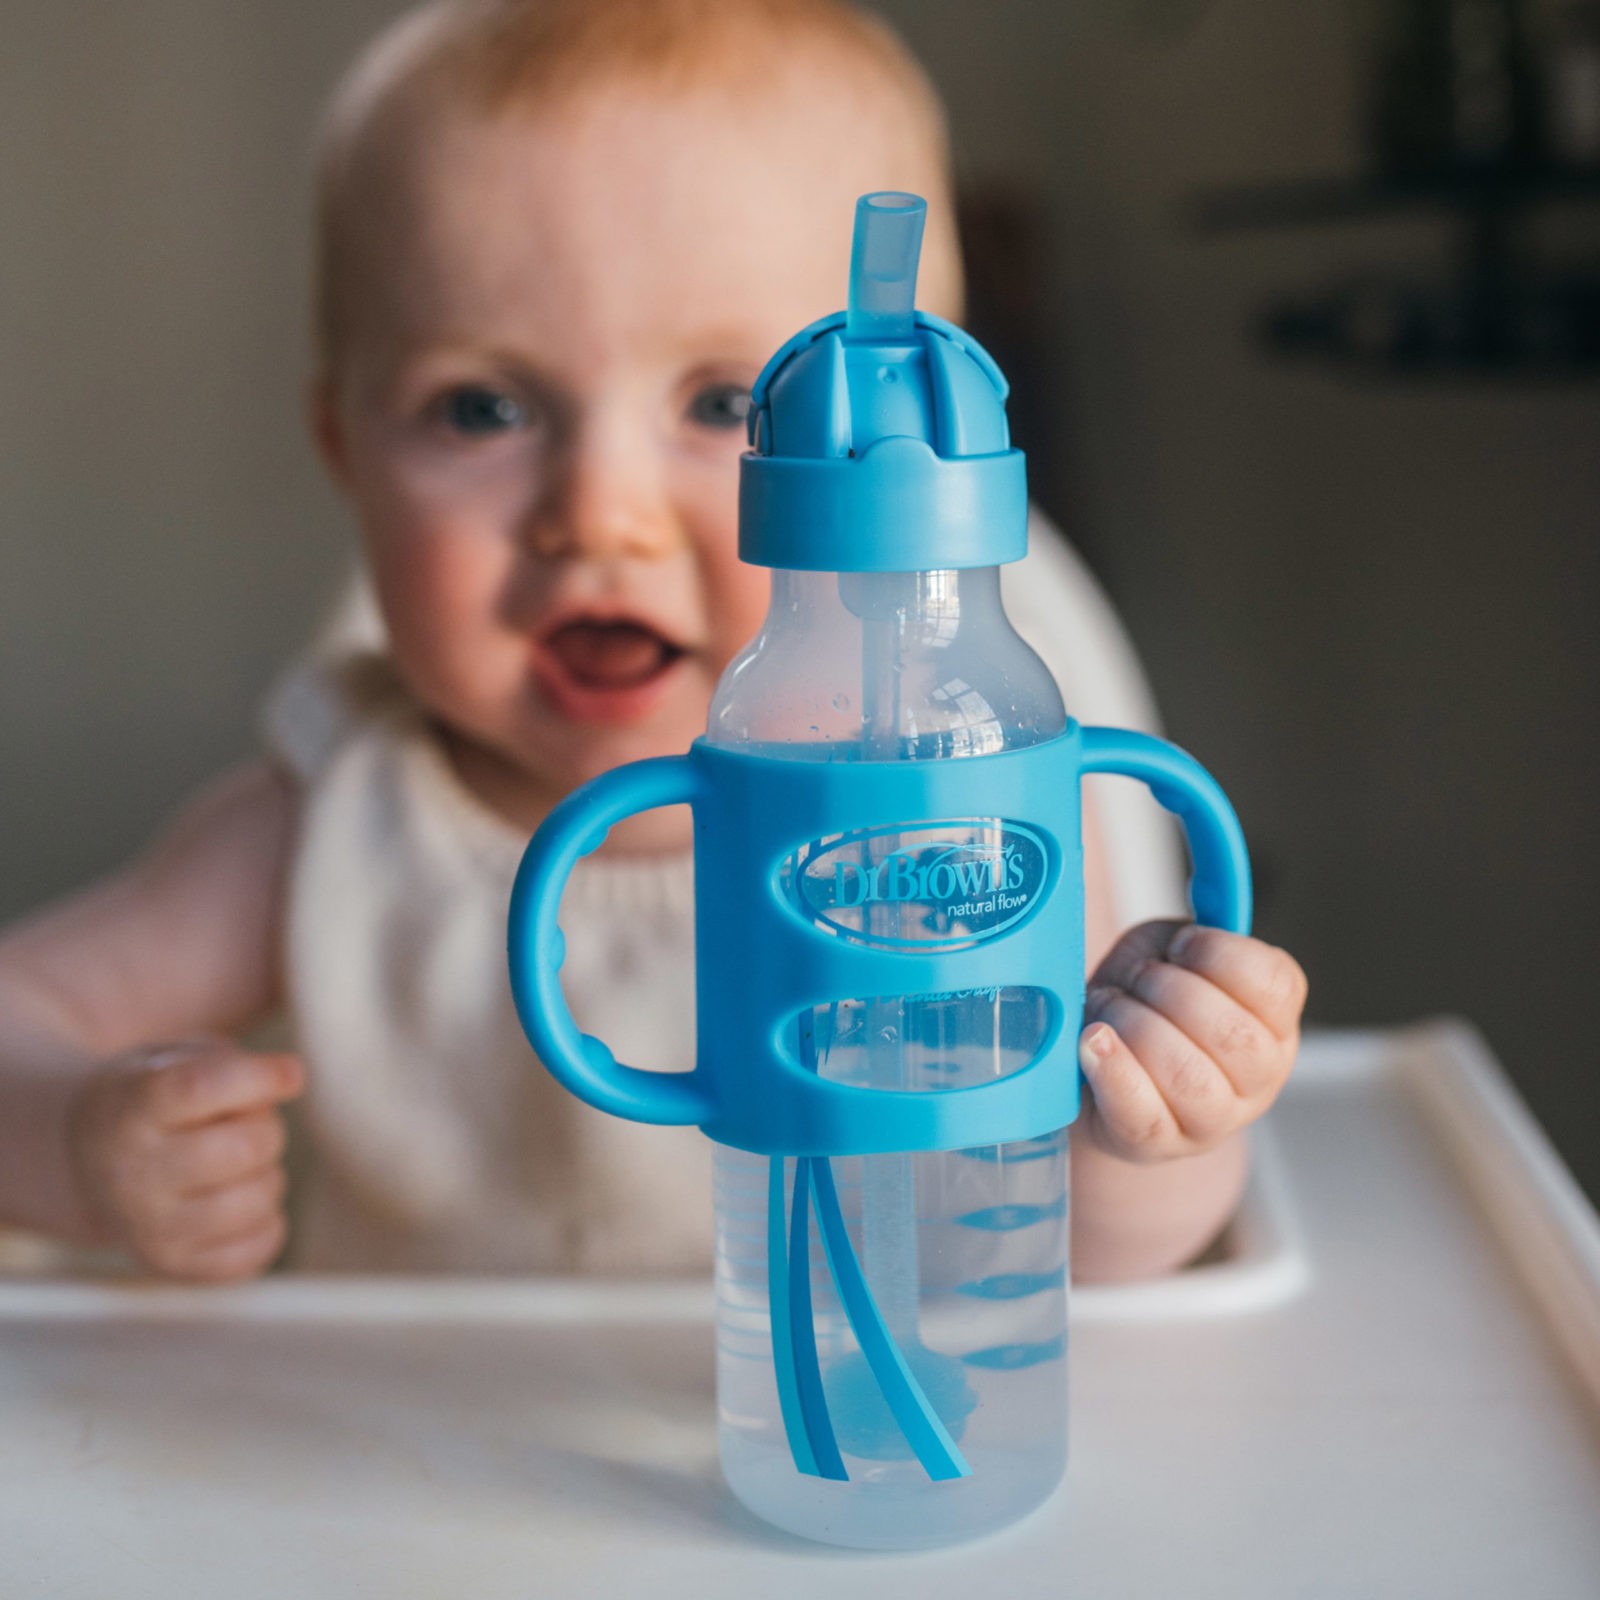 https://www.drbrownsbaby.com/wp-content/uploads/2021/01/Lifestyle_Sippy-Straw-Bottle_Blue_1-scaled.jpg